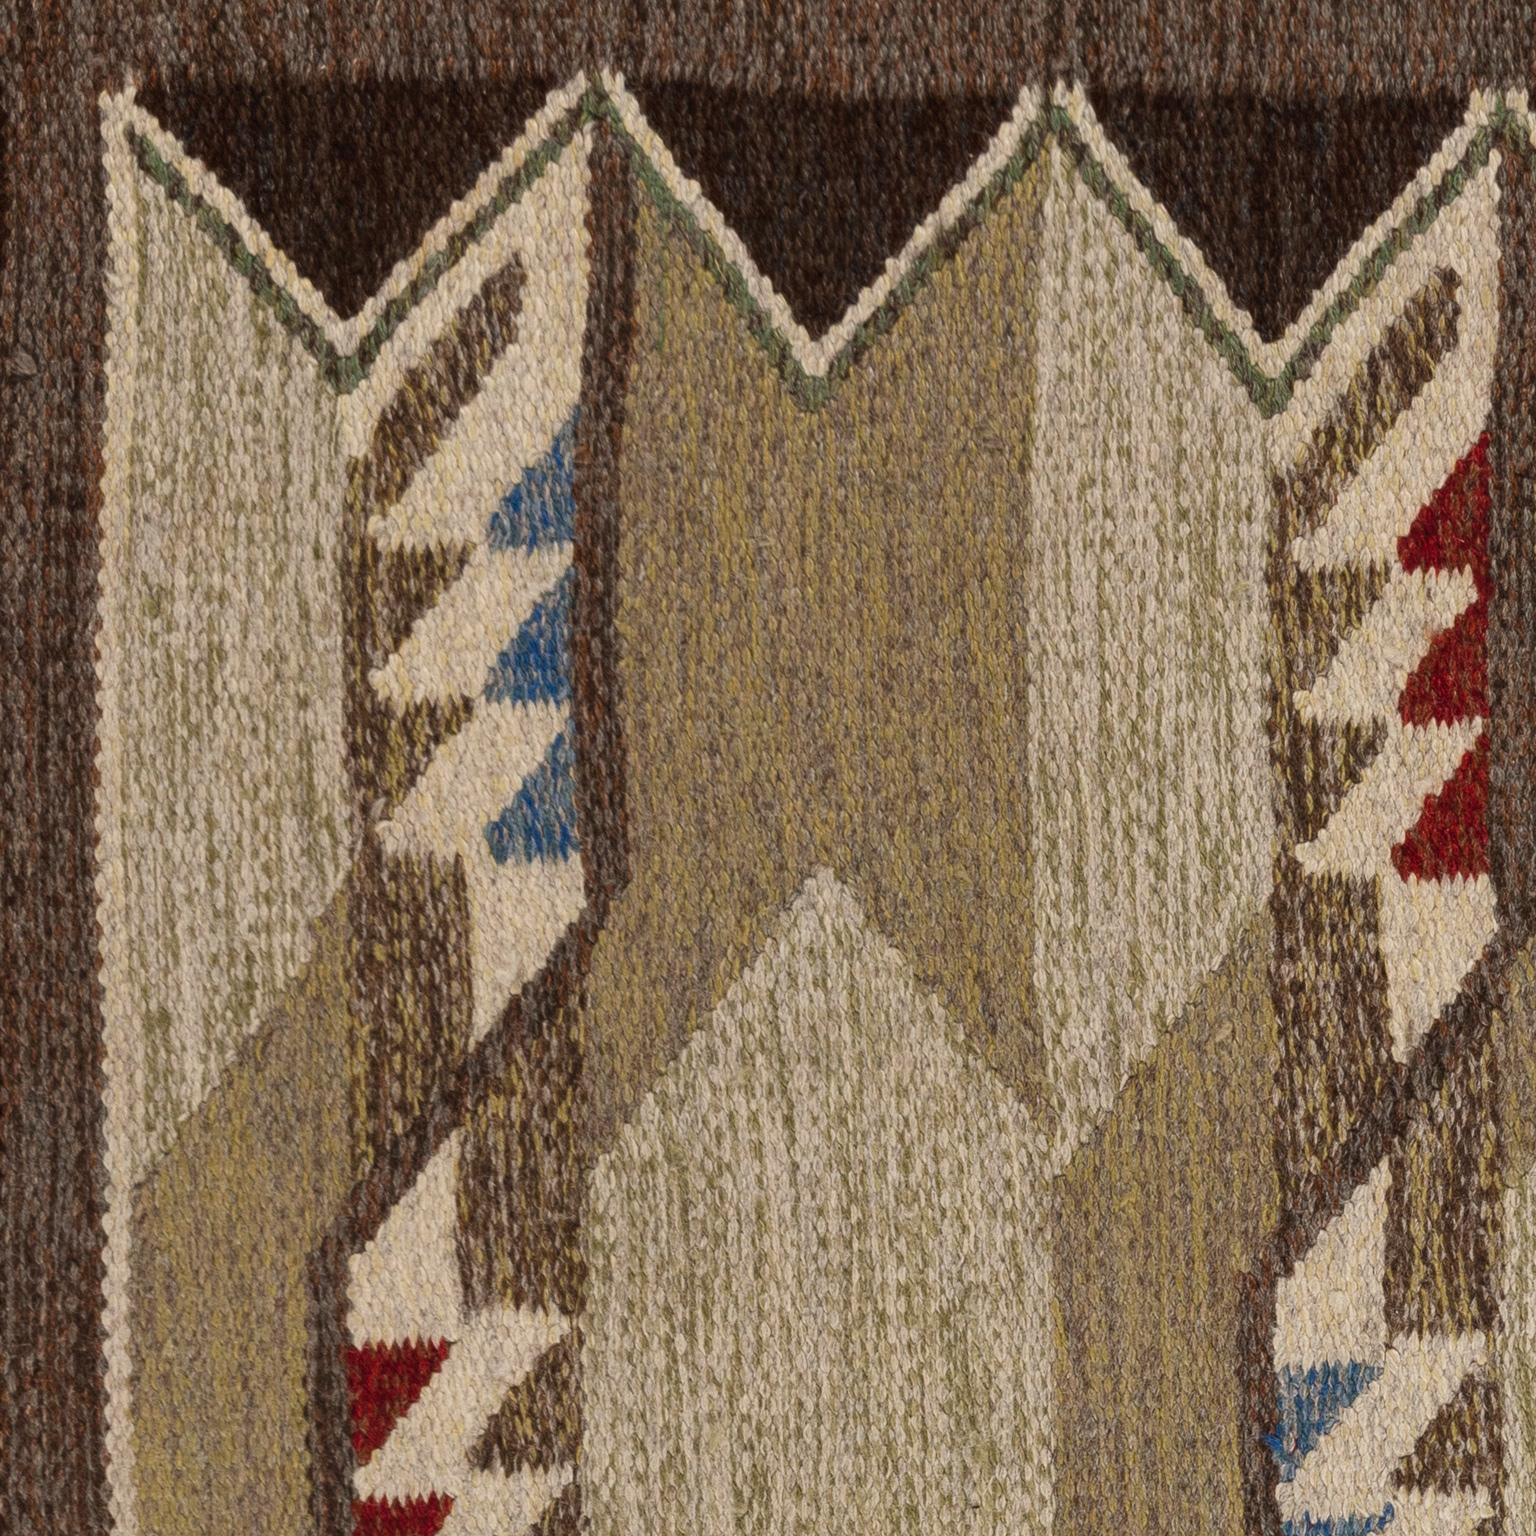 Vintage Scandinavian Swedish rug by Brita Grahn, 1907-2003. Patterns composed from this time gives a touch of contemporary architecture and art. Brita Grahn patterns are based on geometric shapes witch often are broken by a strong contrast with